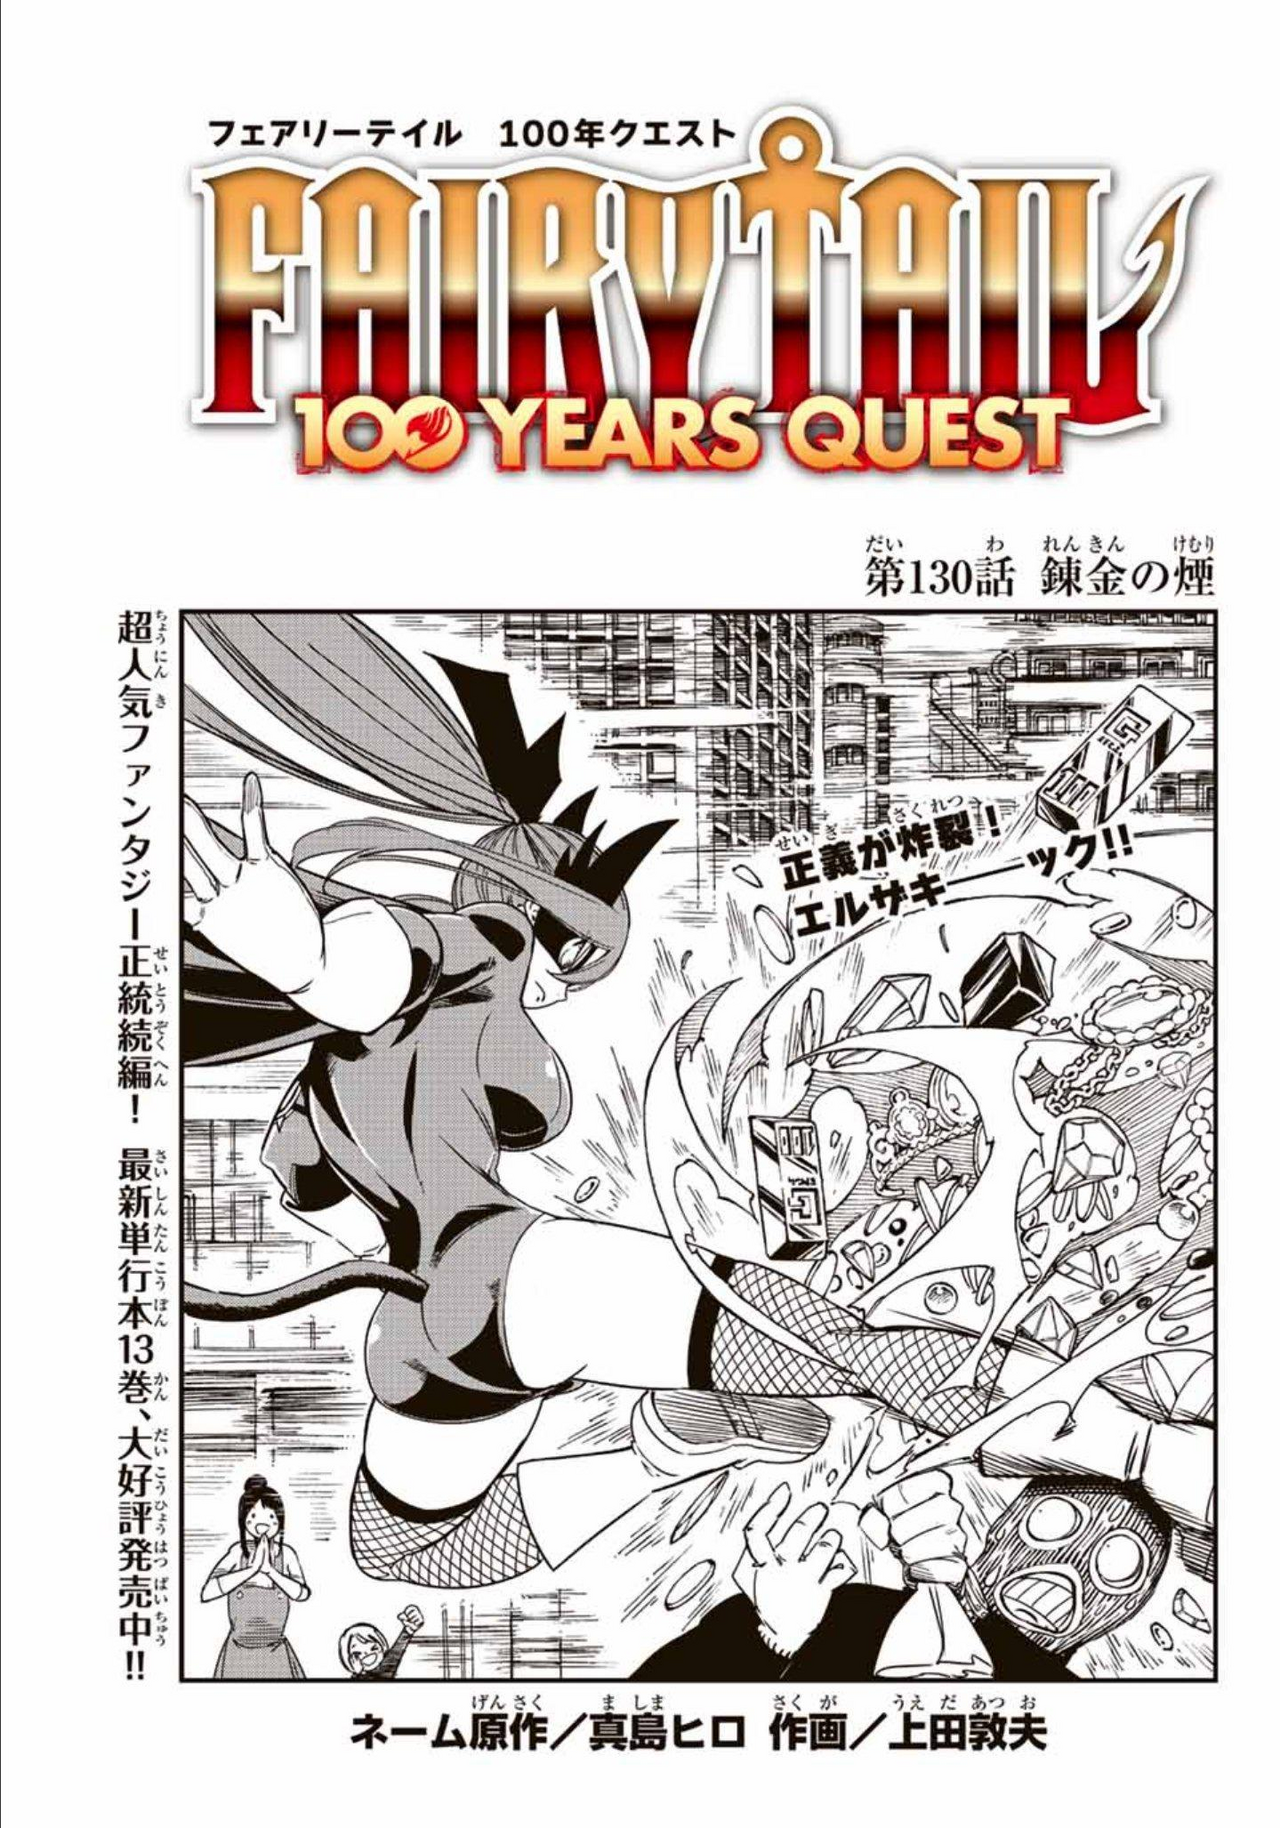 FAIRY TAIL: 100 Years Quest 9 in 2023